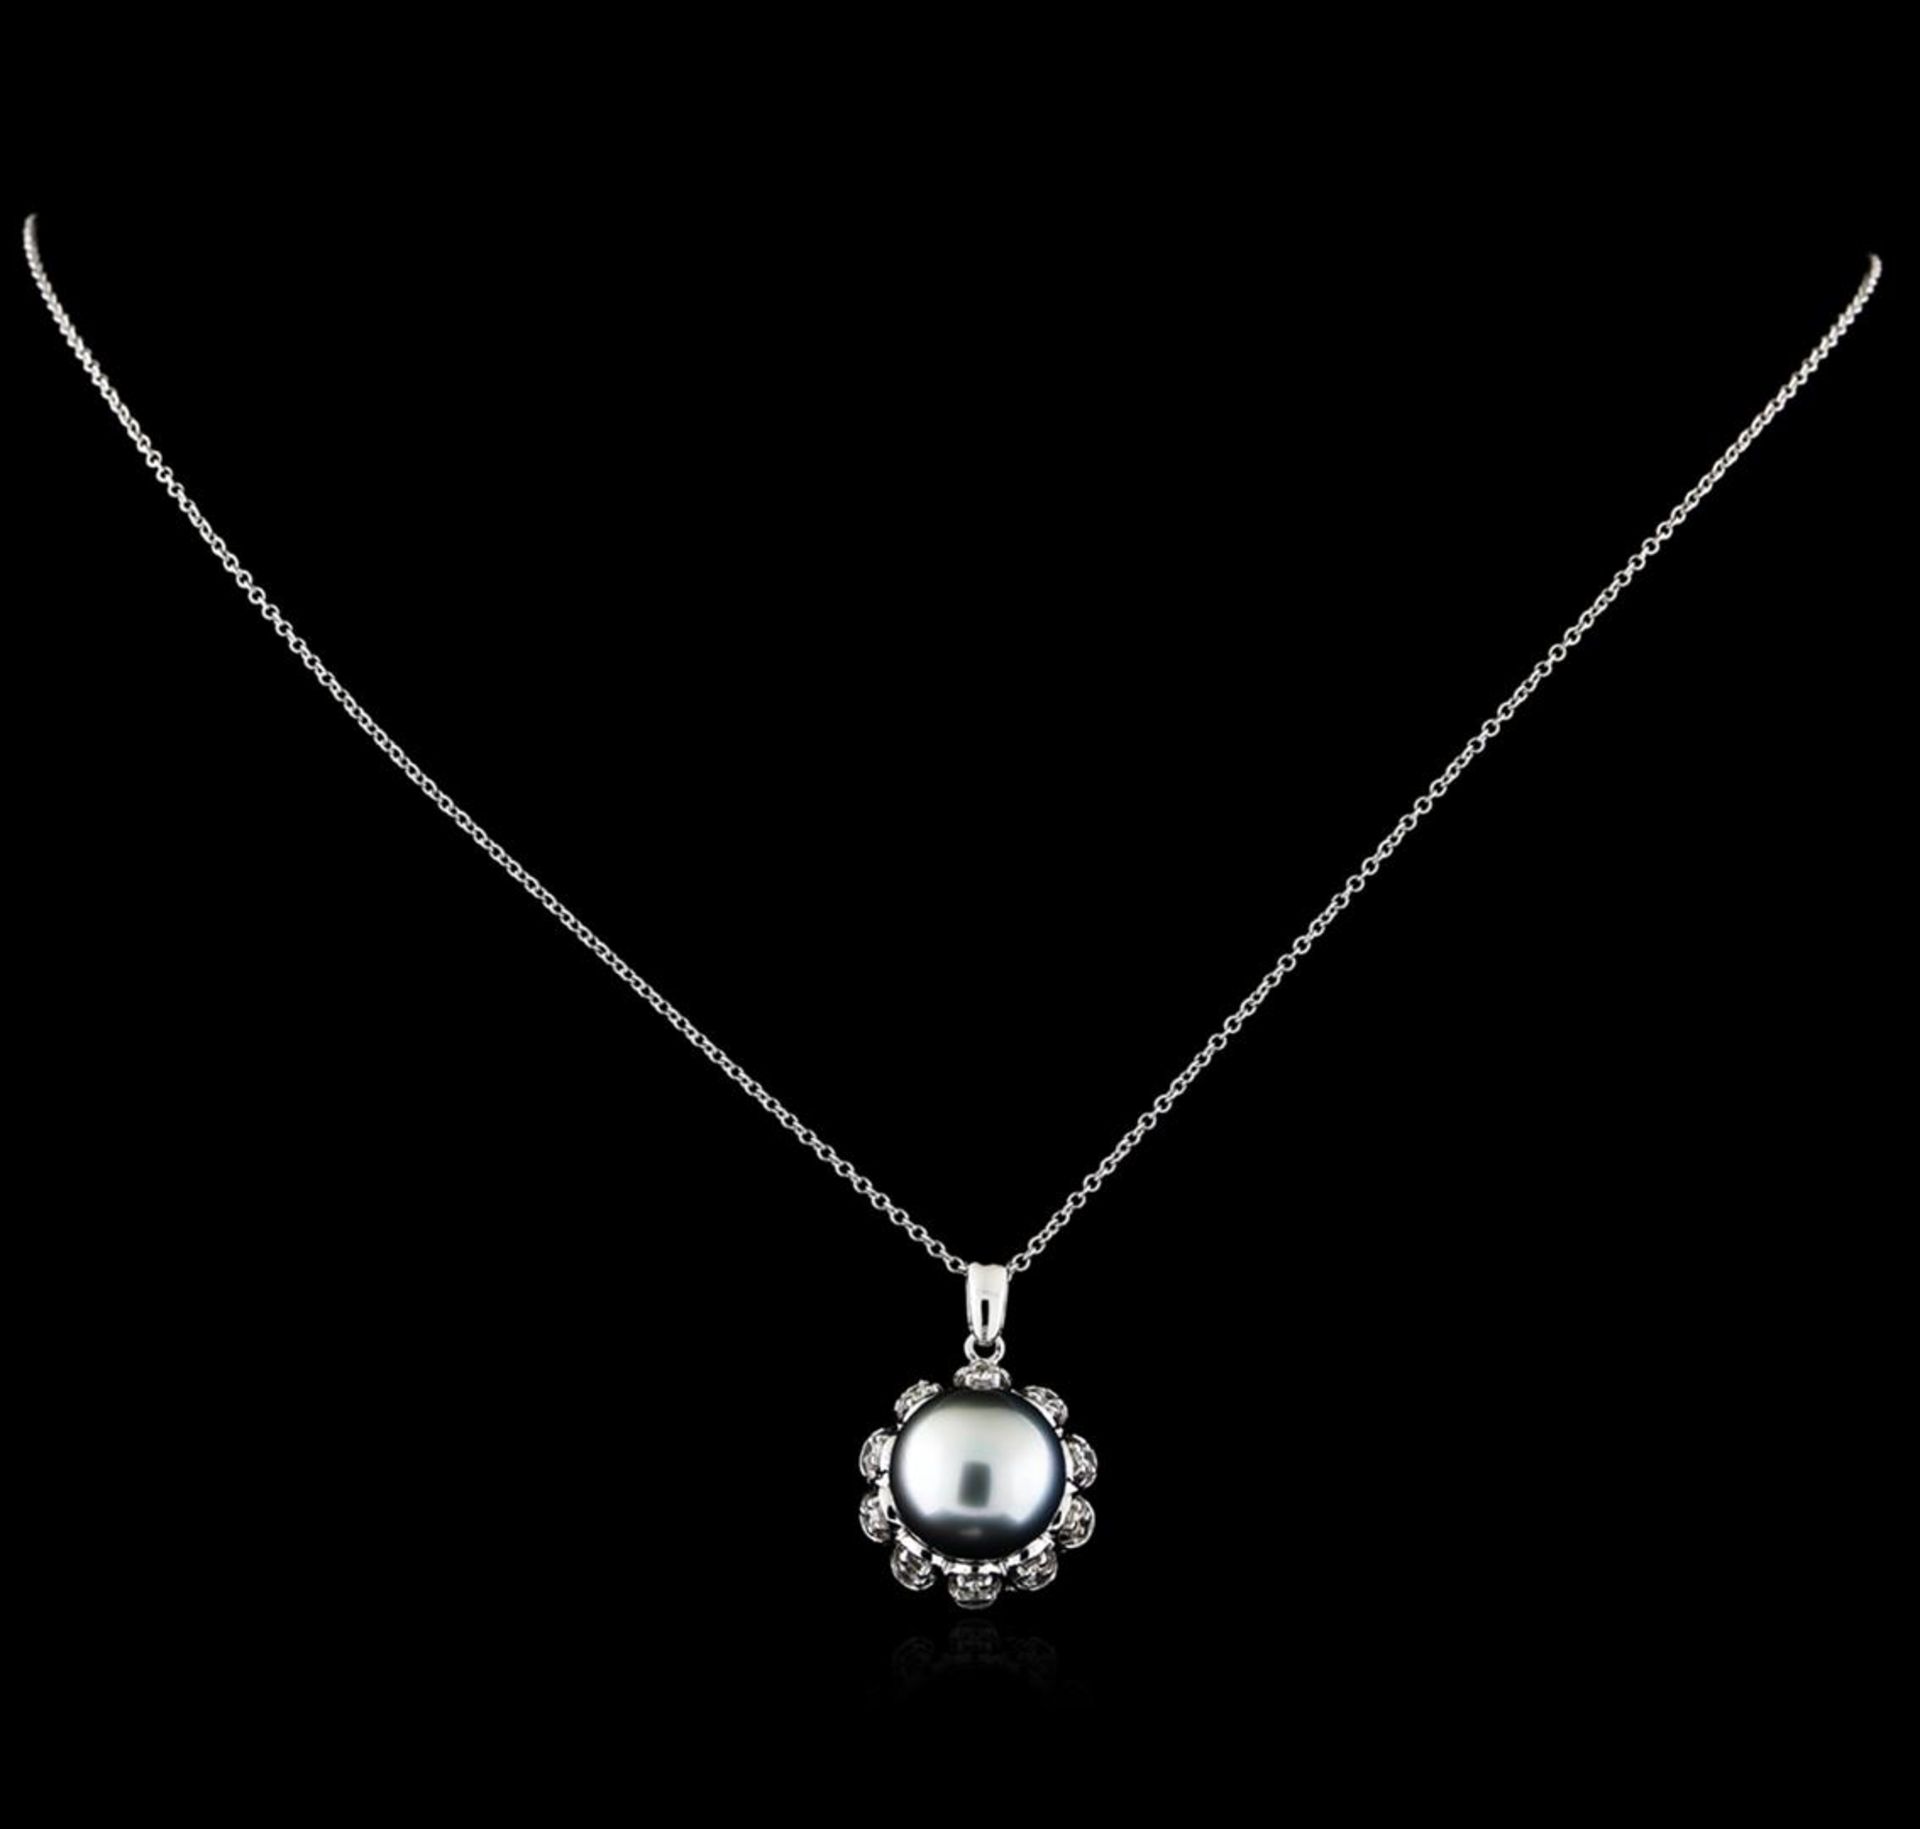 0.30 ctw Pearl and Diamond Pendant With Chain - 14KT White Gold - Image 2 of 2